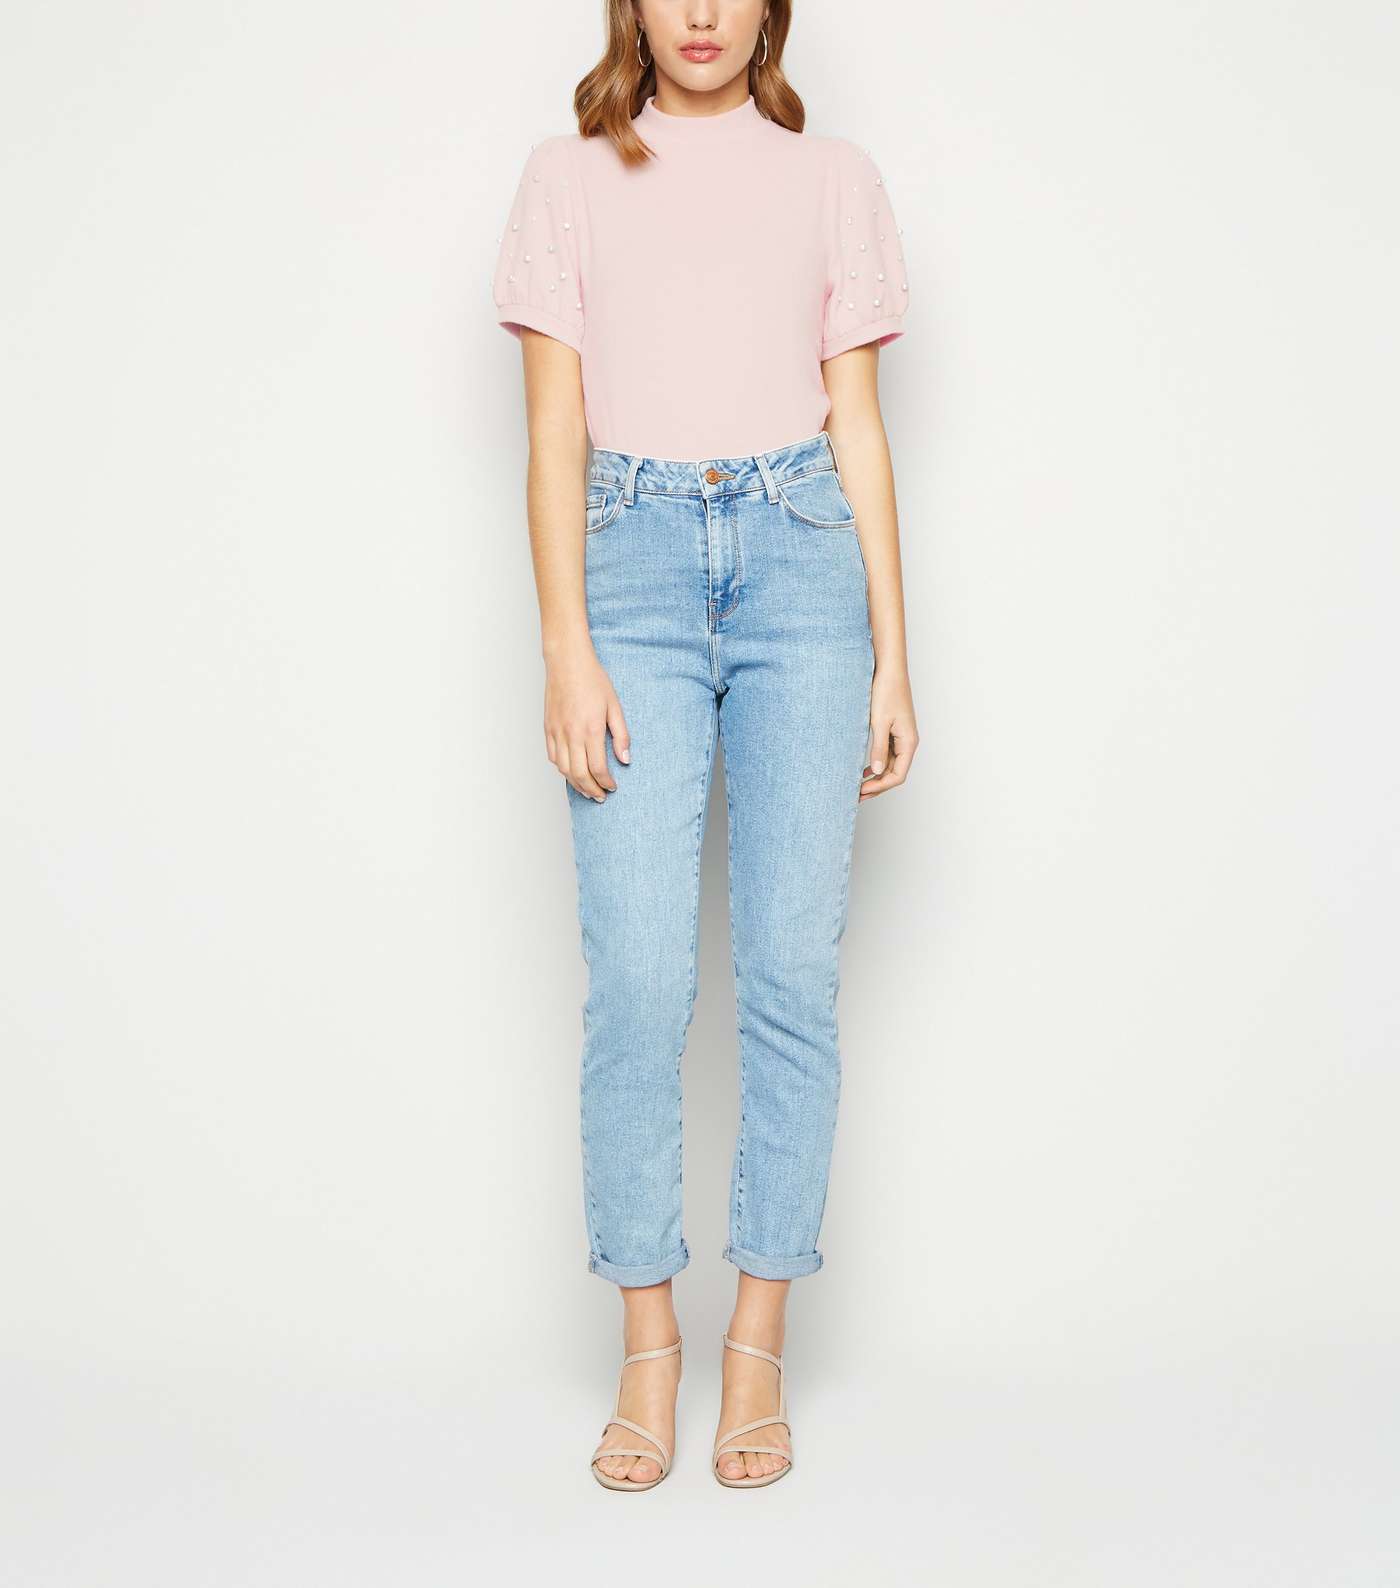 Pale Pink Faux Pearl High Neck T-Shirt Image 2